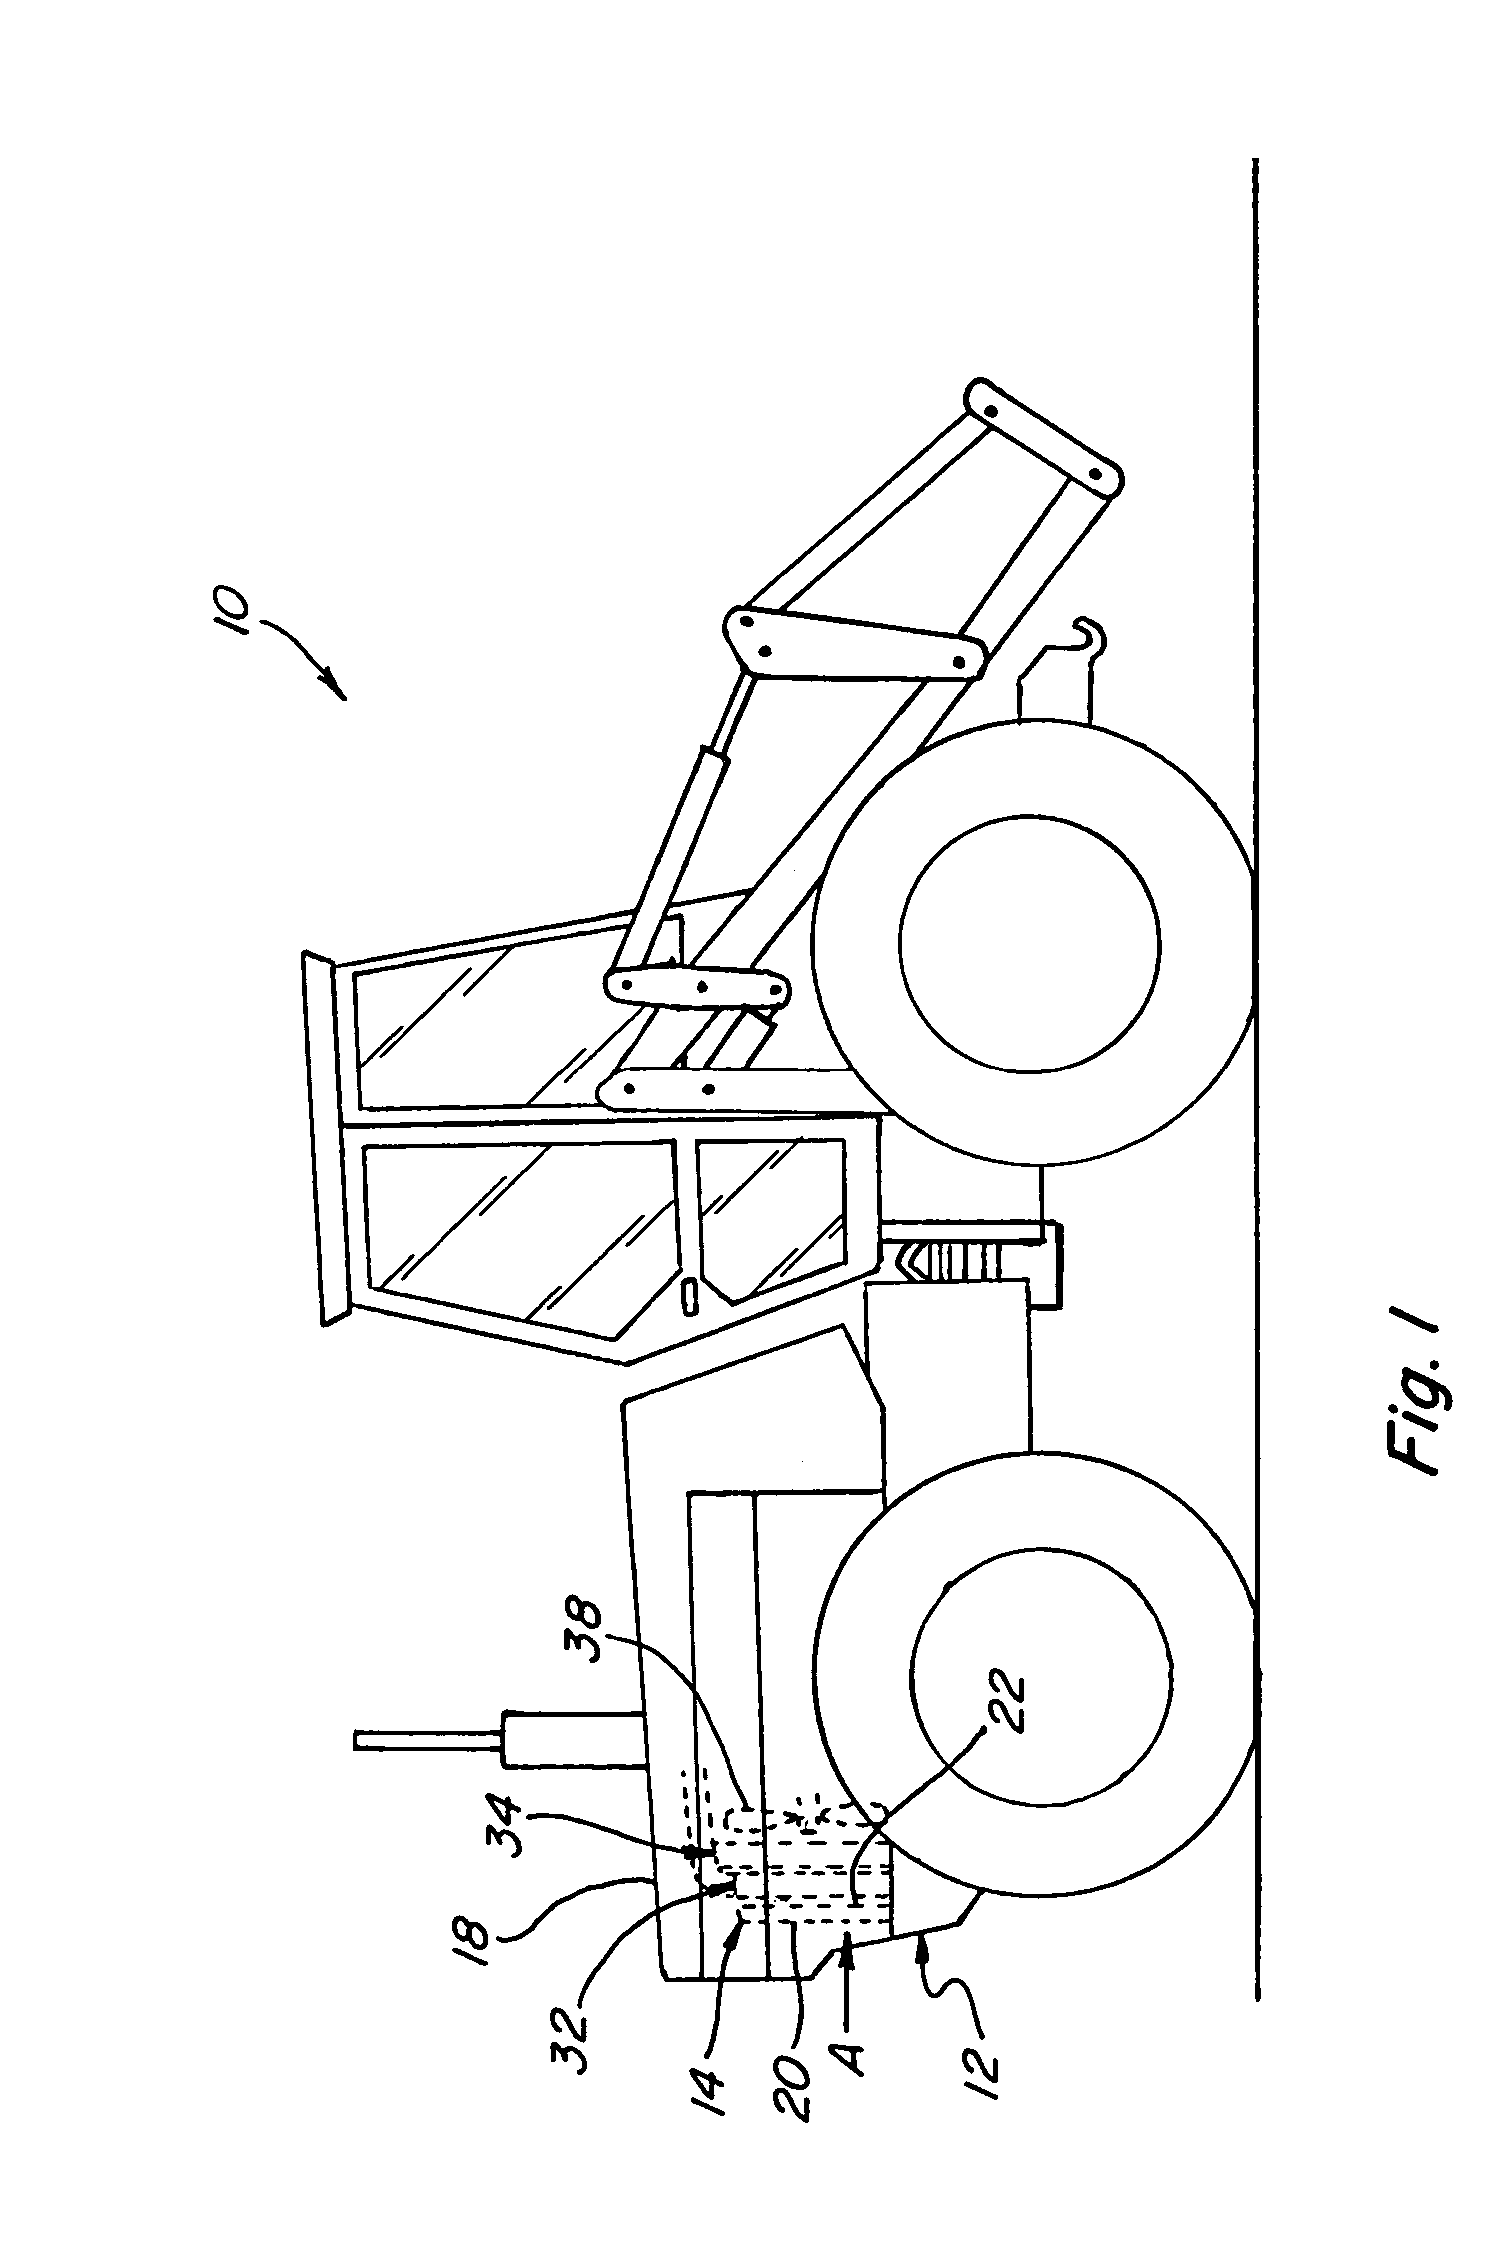 Apparatus for tilting and securing a heat exchanger